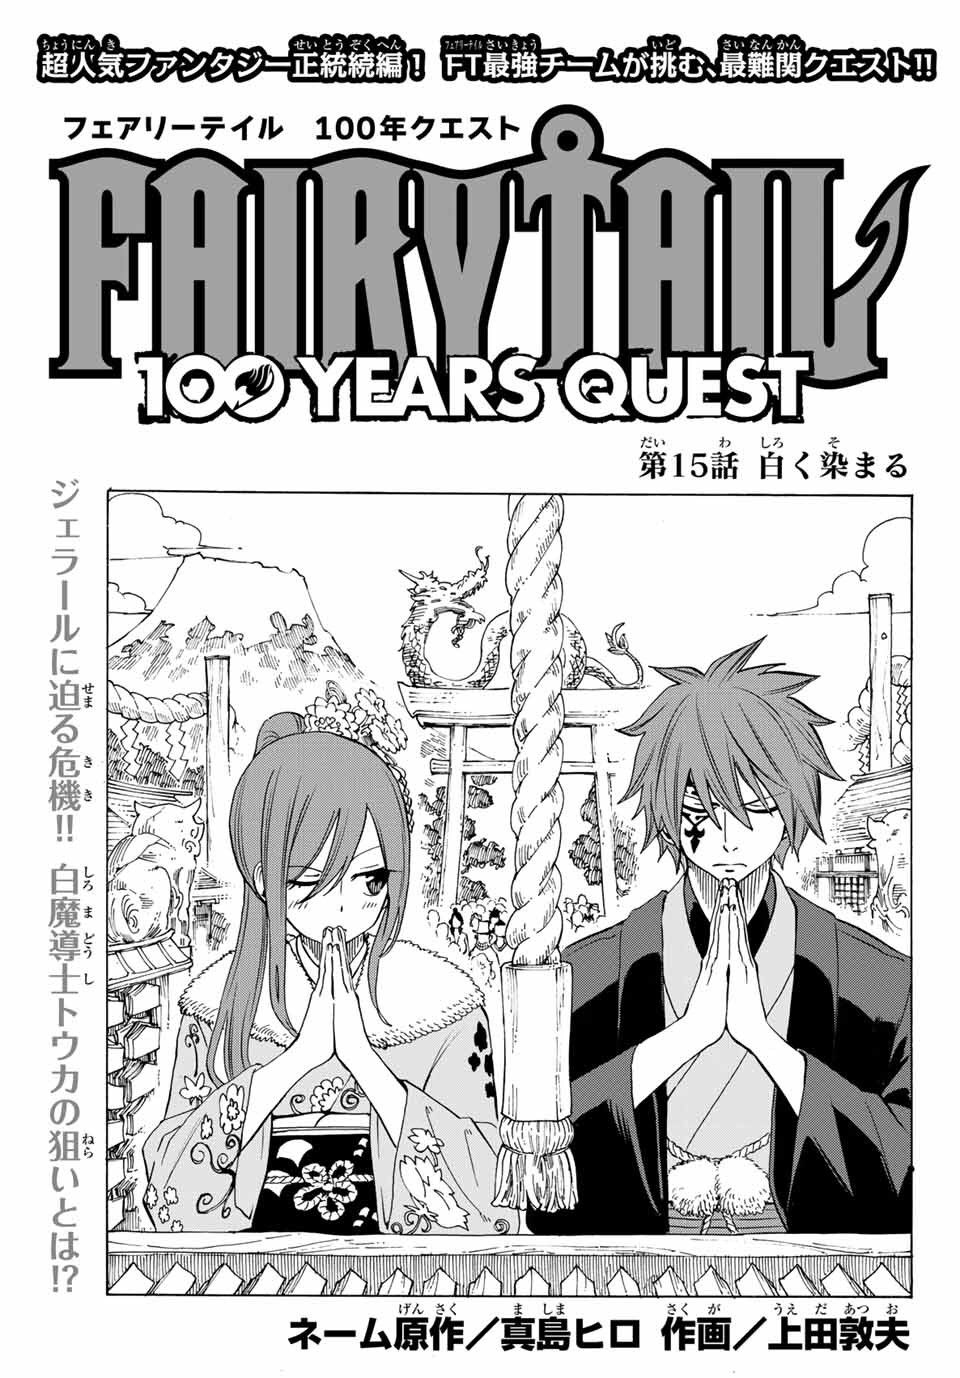 Fairy Tail 100 Years Quest Chapter 15 Fairy Tail Wiki Fandom